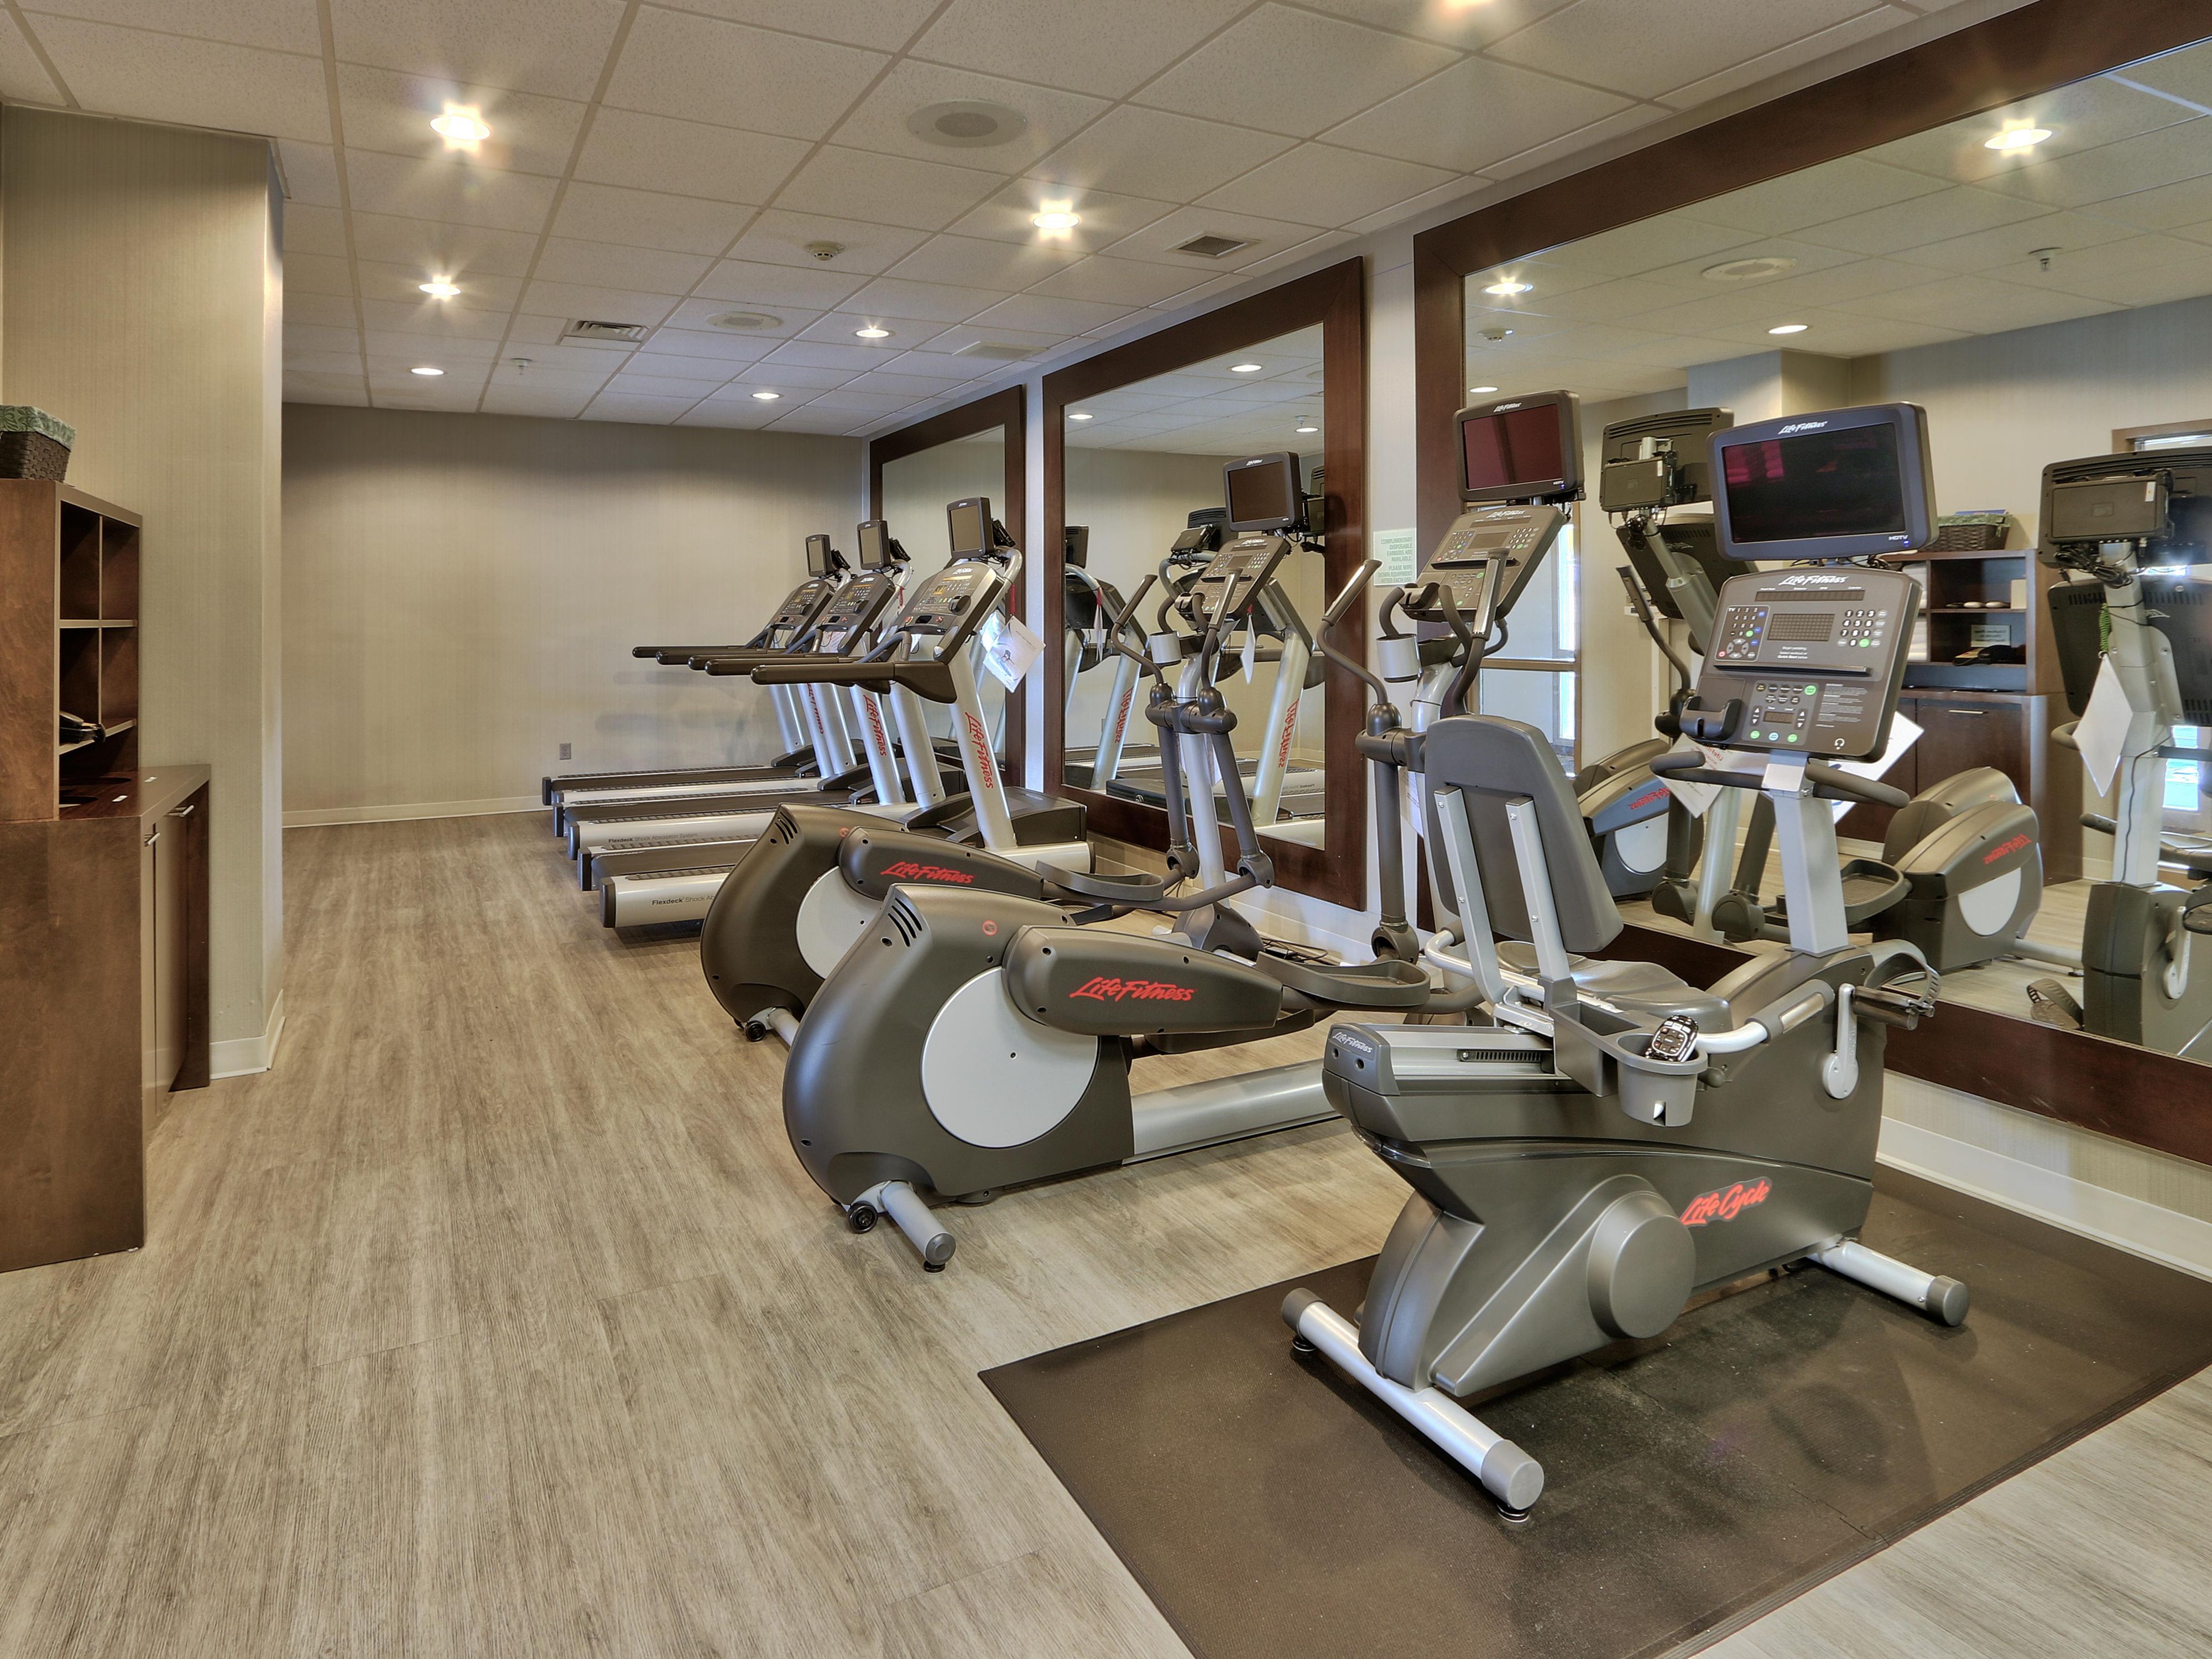 Get your sweat on in our complimentary, fully equipped fitness center open for 24 hours.